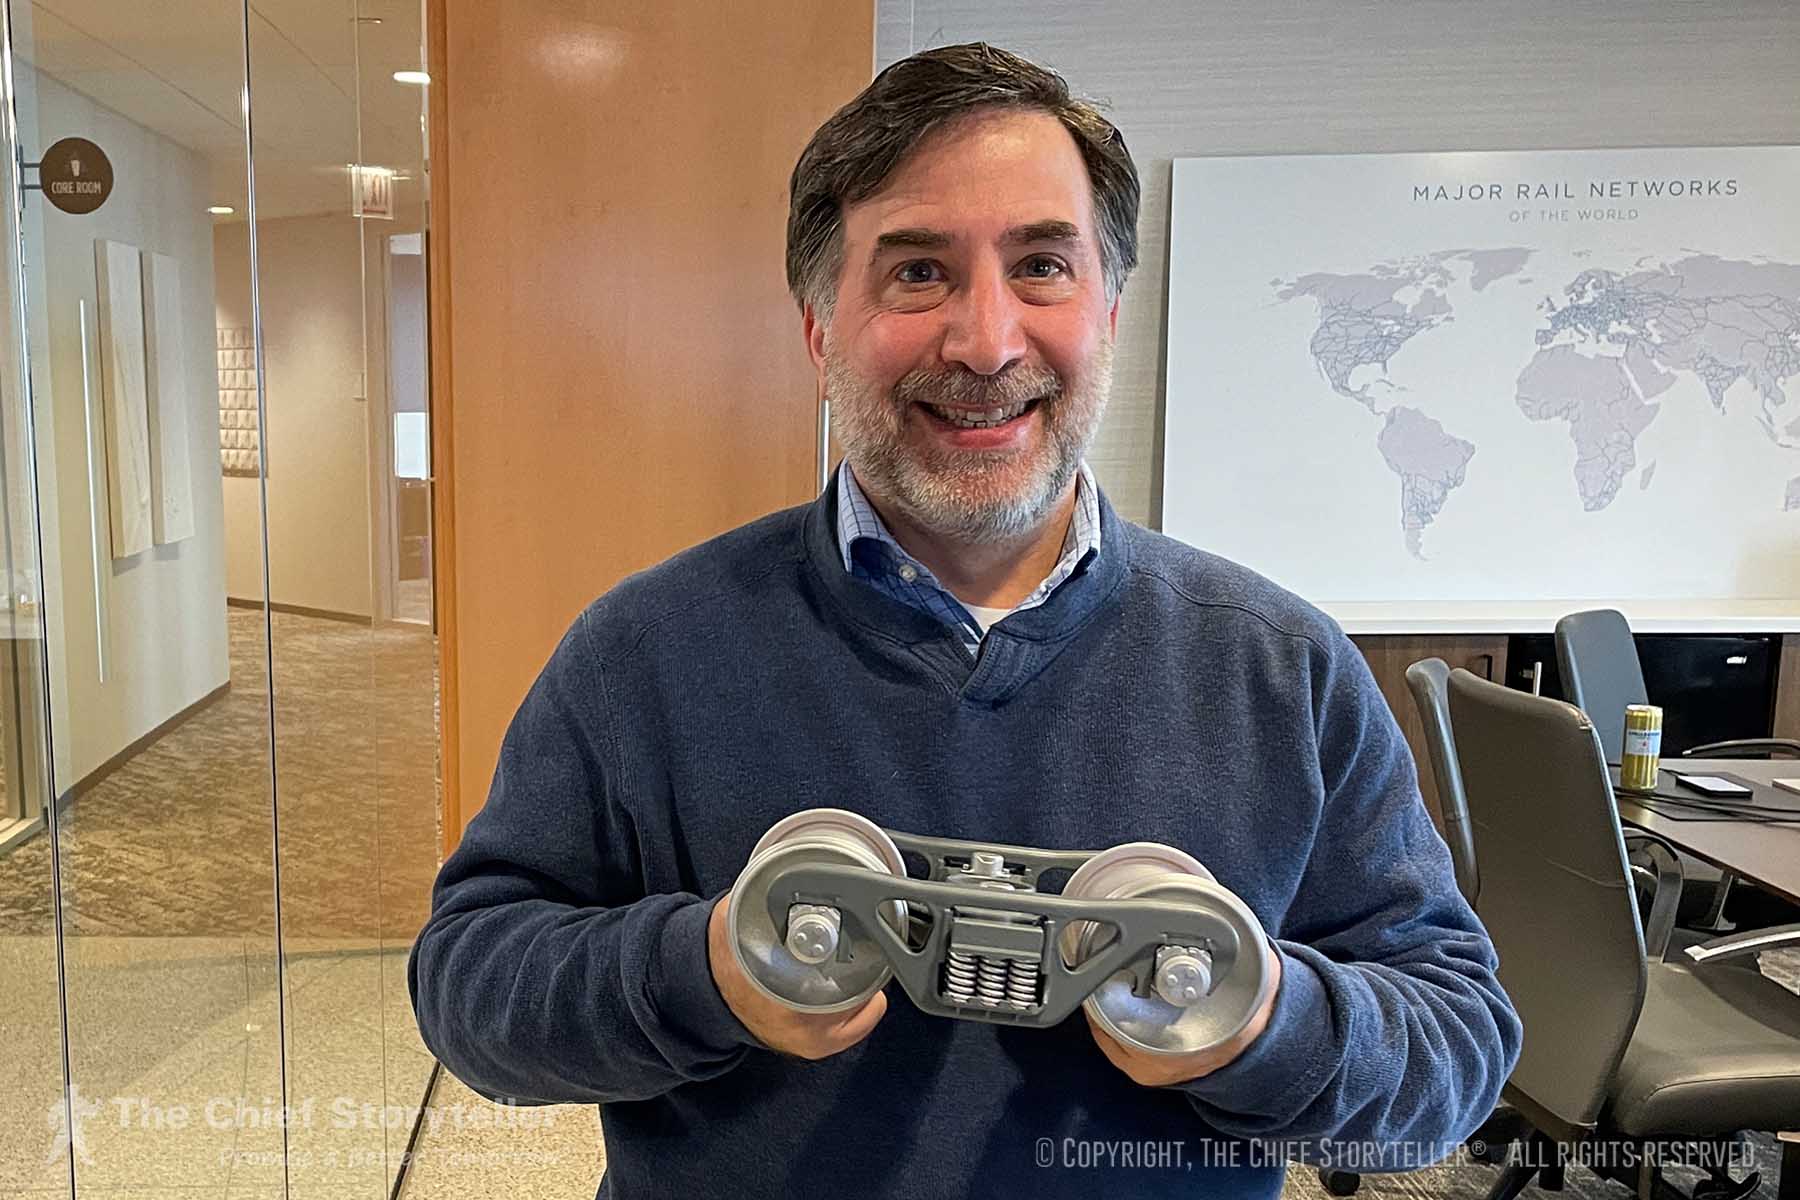 Ira Koretsky, CEO of The Chief Storyteller, holding a miniature wheel assembly for a railroad car - example of a symbol